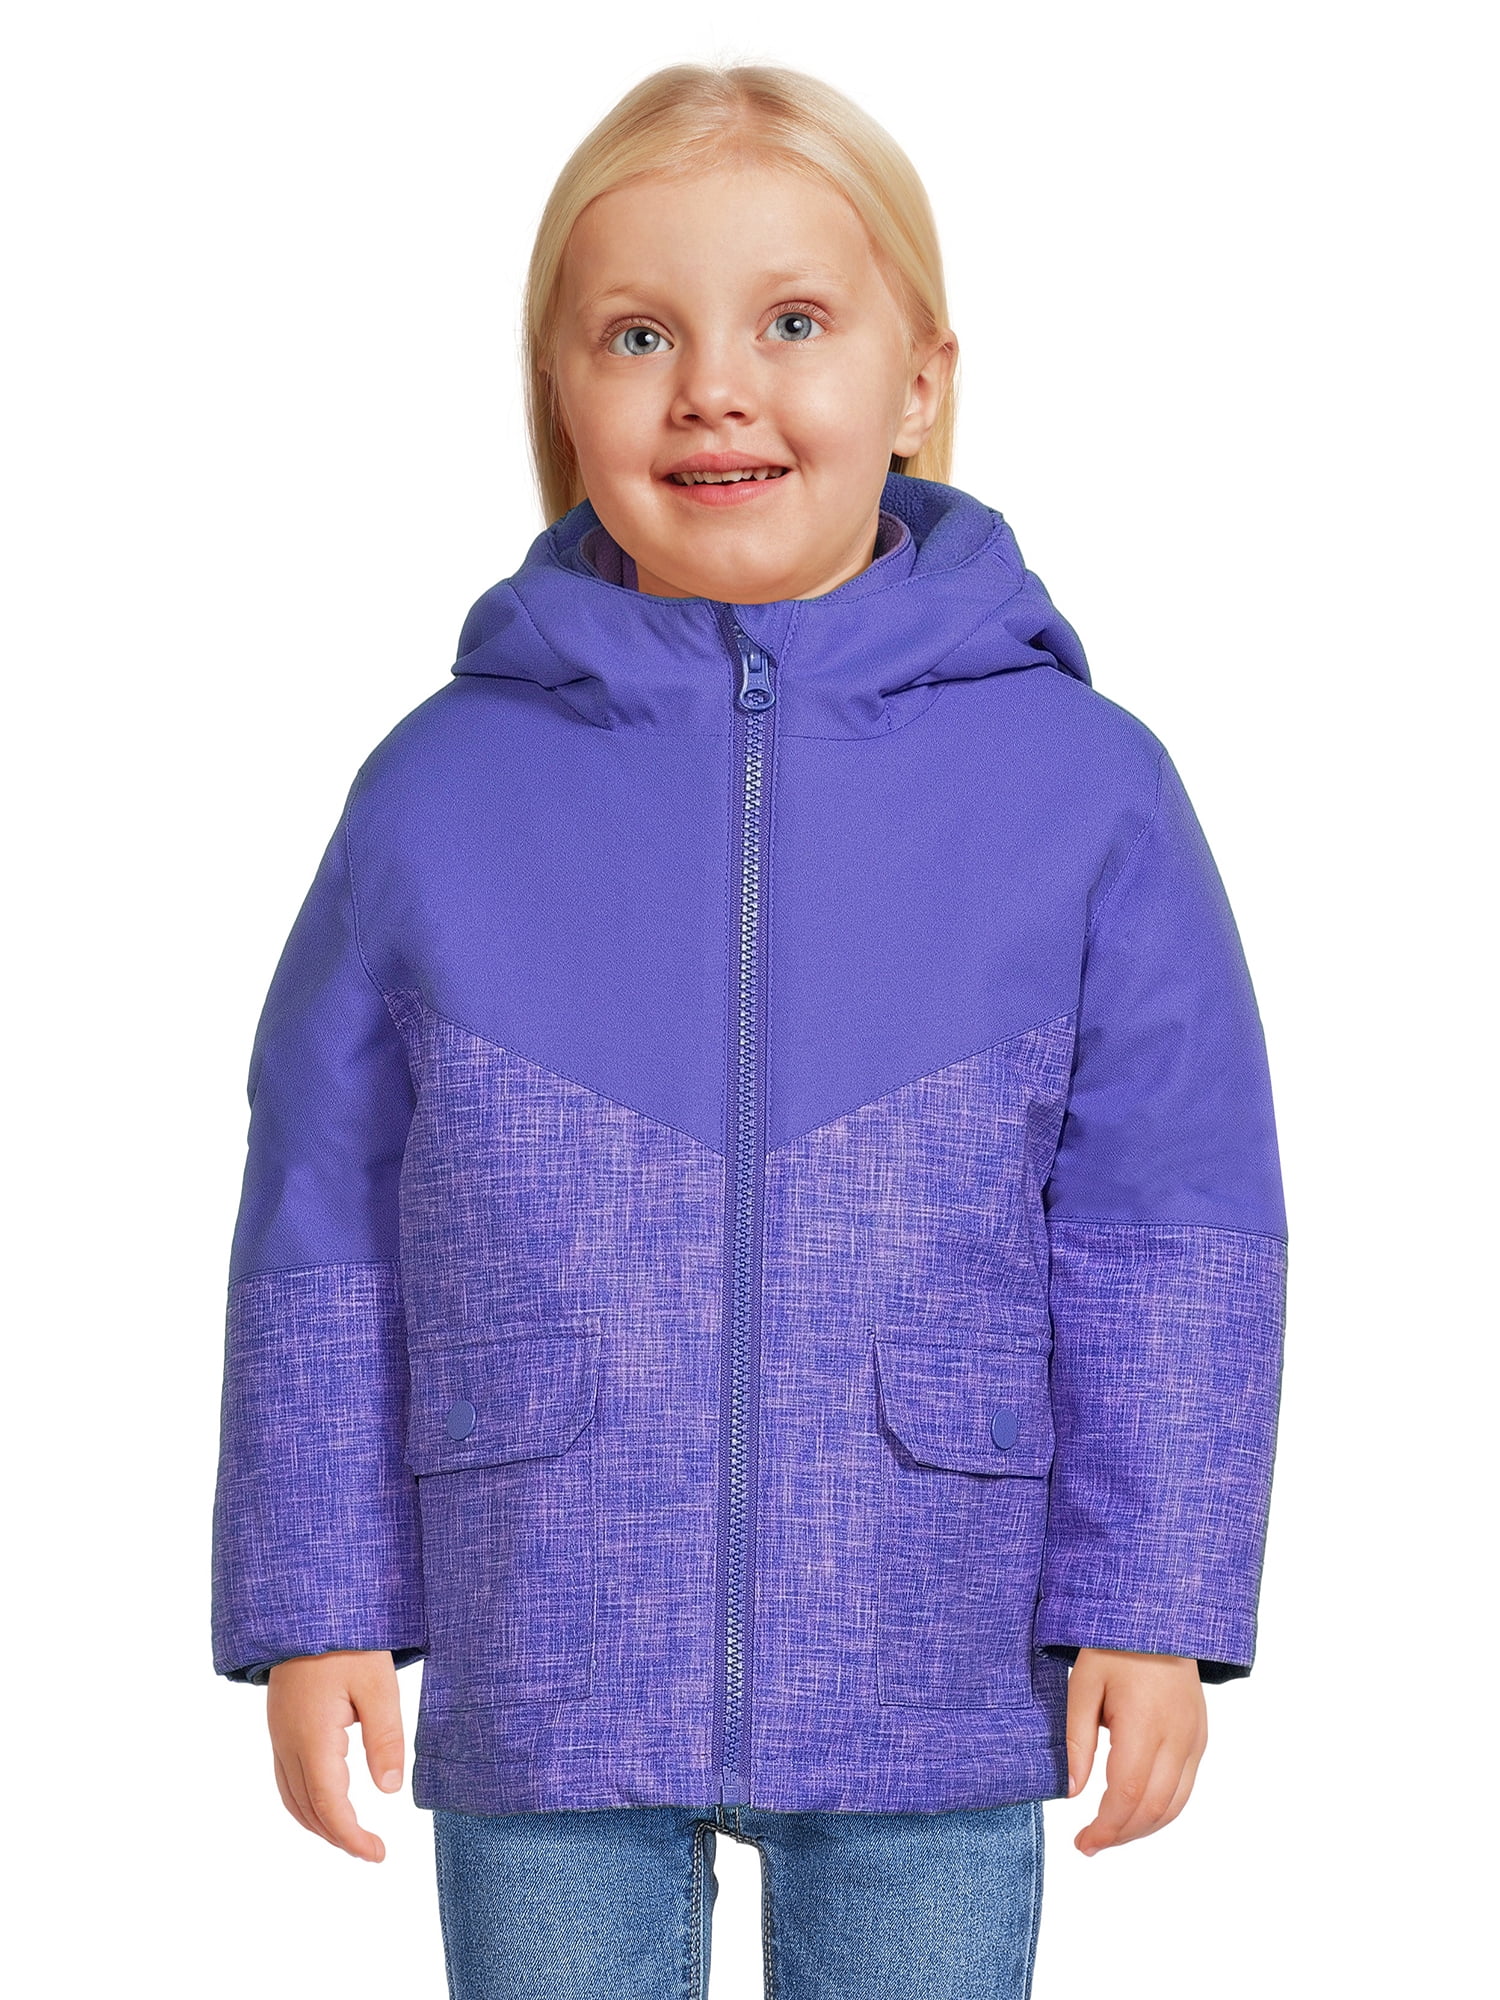 Swiss Tech Toddler Heavyweight Systems Jacket, 4-in-1, Sizes 2T-5T ...